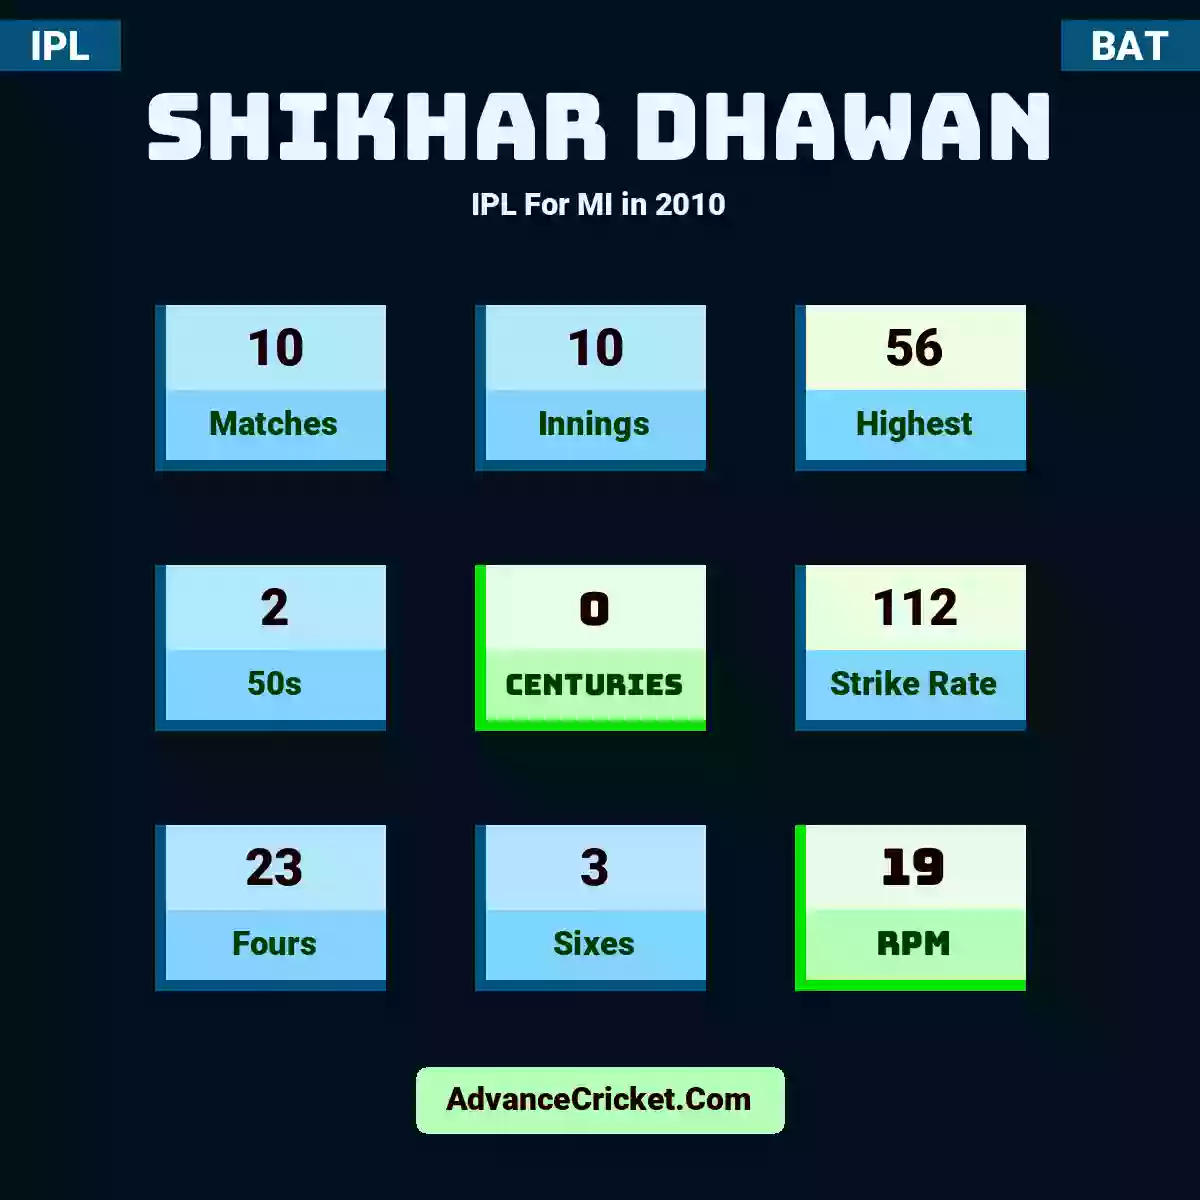 Shikhar Dhawan IPL  For MI in 2010, Shikhar Dhawan played 10 matches, scored 56 runs as highest, 2 half-centuries, and 0 centuries, with a strike rate of 112. S.Dhawan hit 23 fours and 3 sixes, with an RPM of 19.